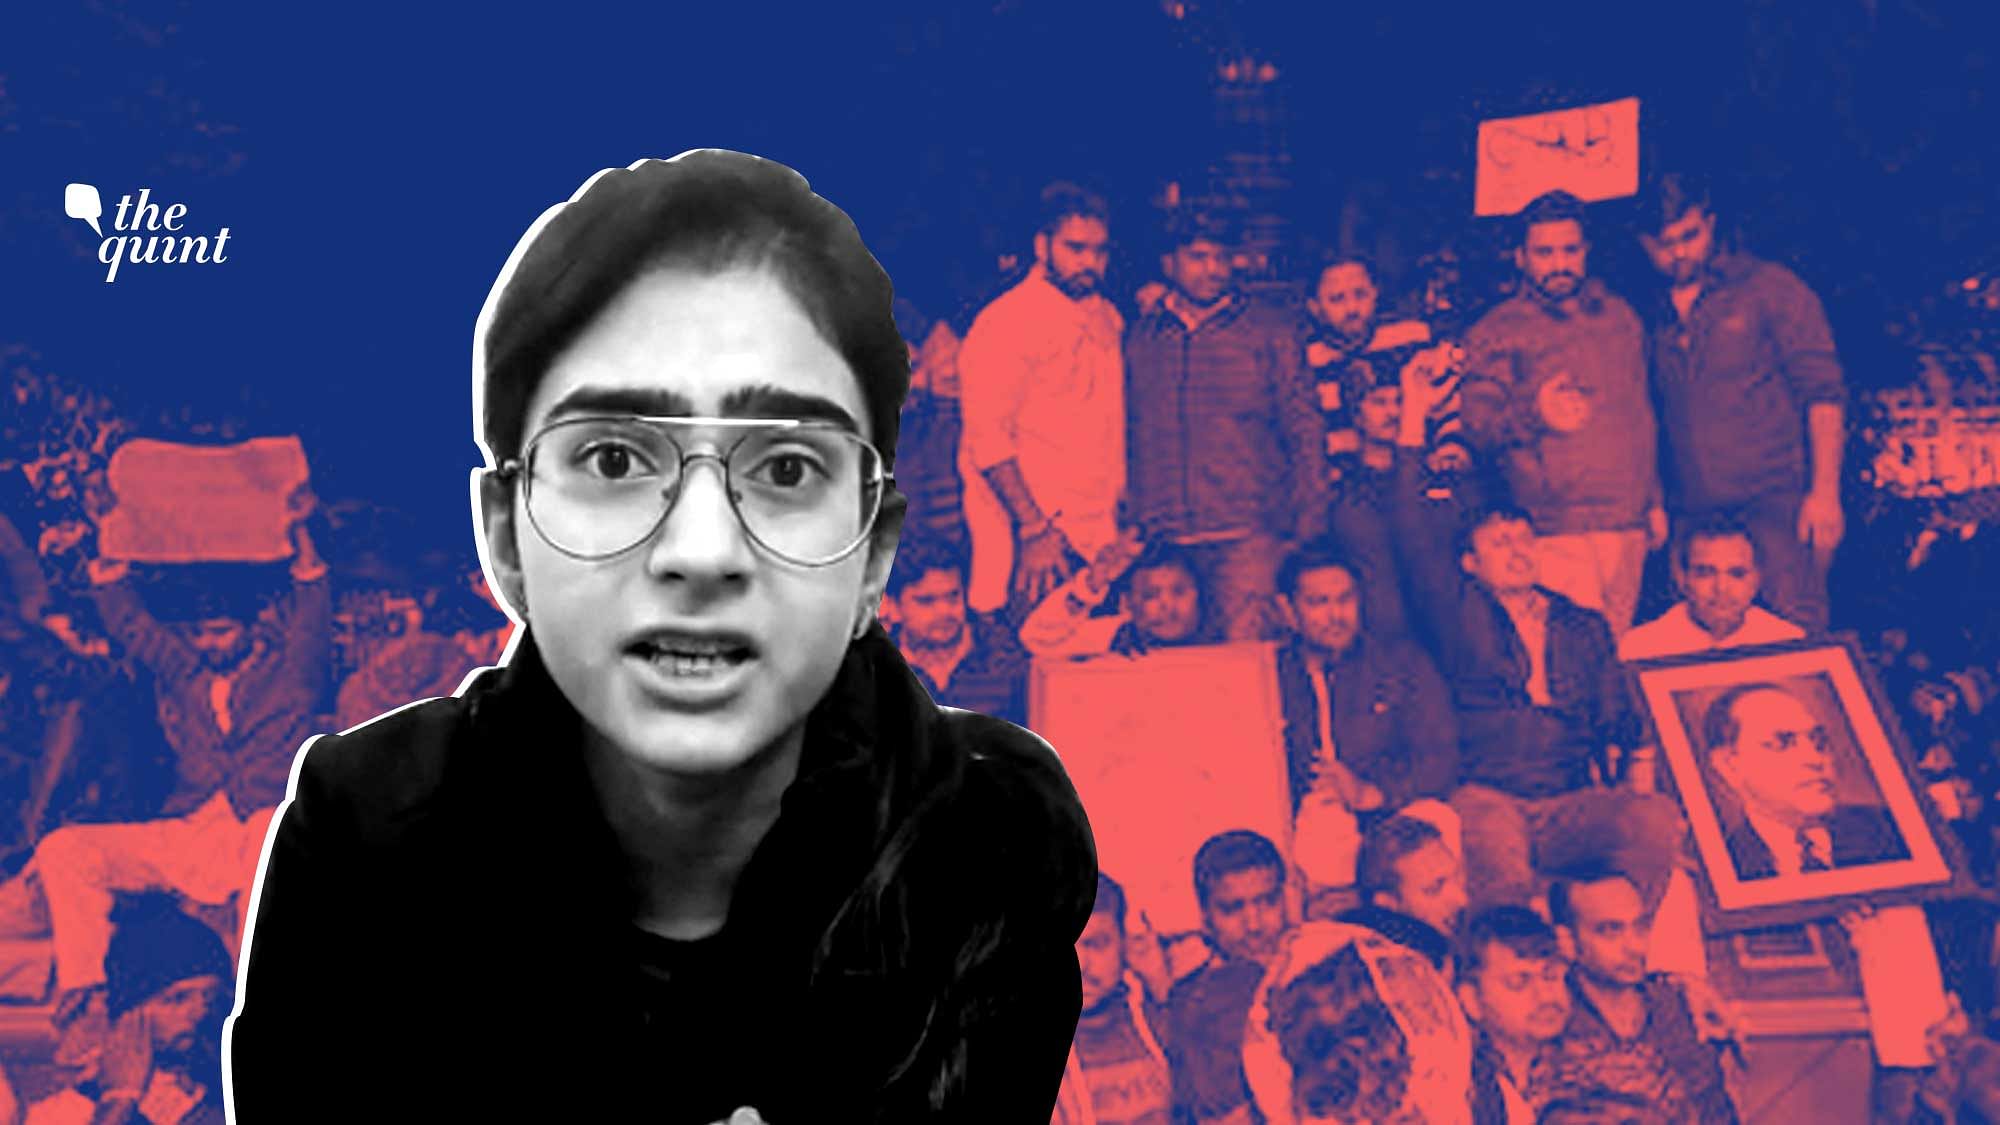 A Law student from Jamia University tells The Quint about her plight while she was stuck inside the Jamia University on 15 December and how the Delhi Police mistreated and brutally thrashed the students.&nbsp;